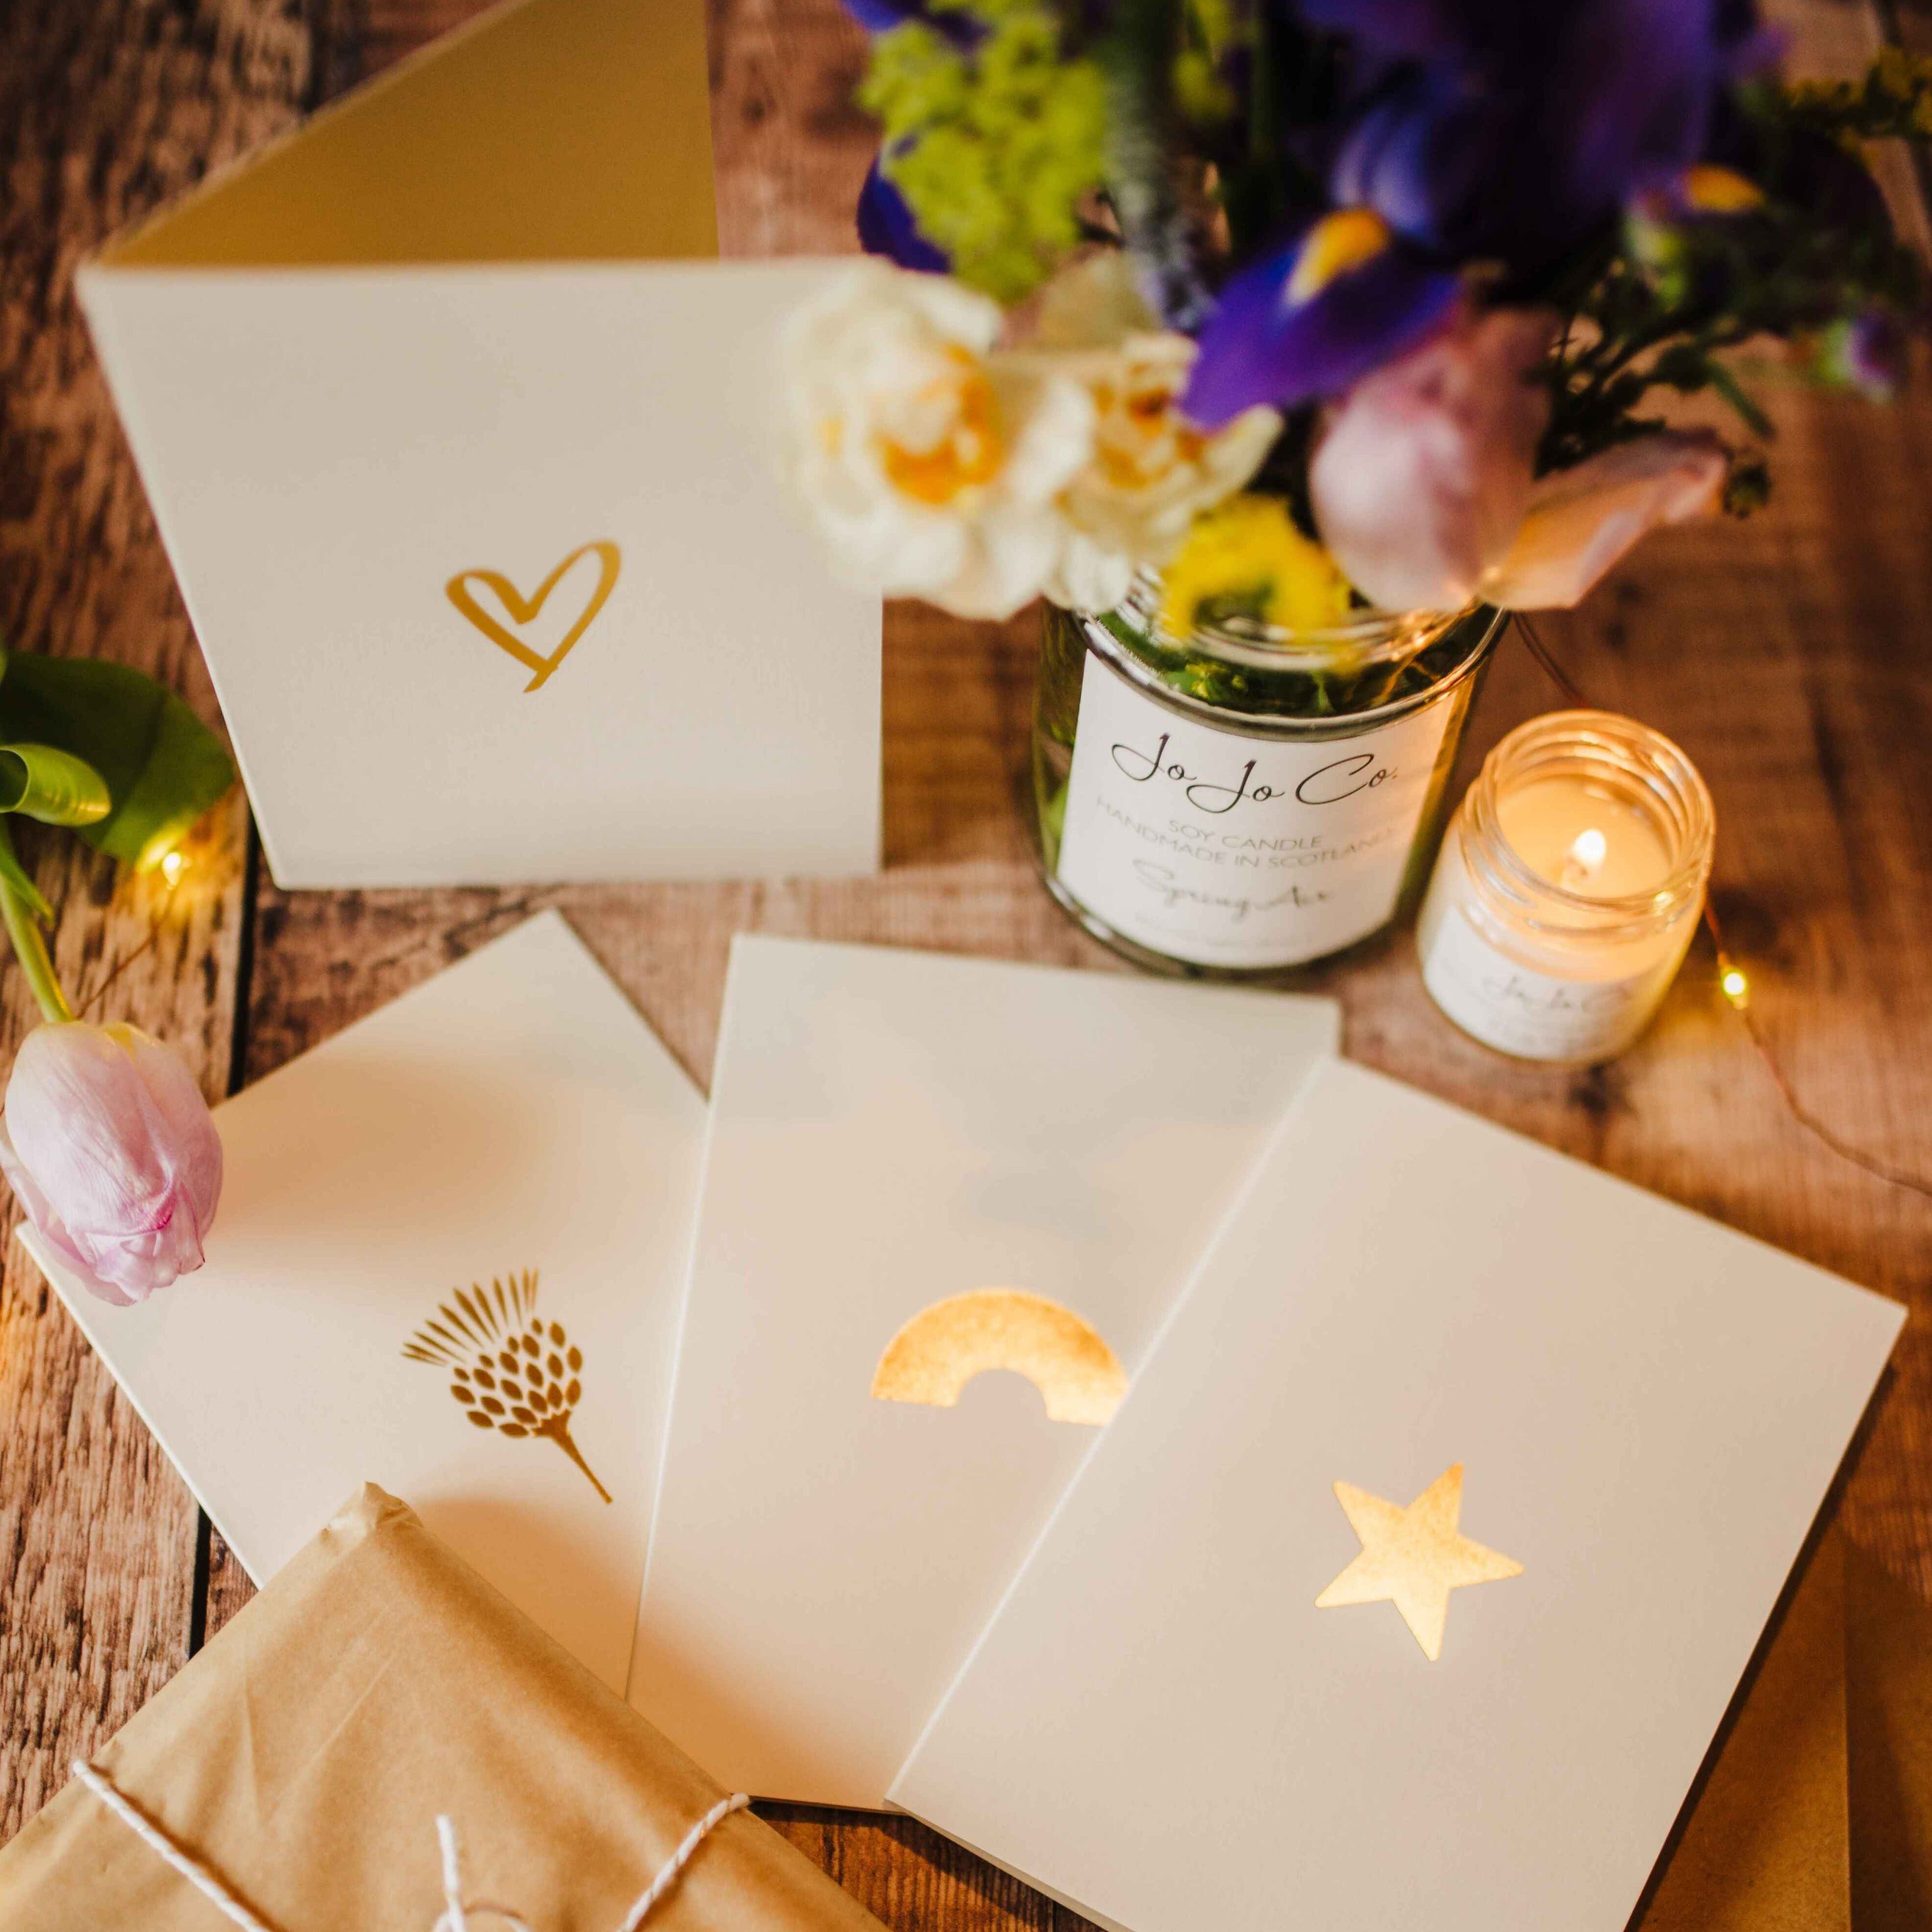 Selection of cream cards with gold motifs and a reused candle jar of Spring Air with flowers